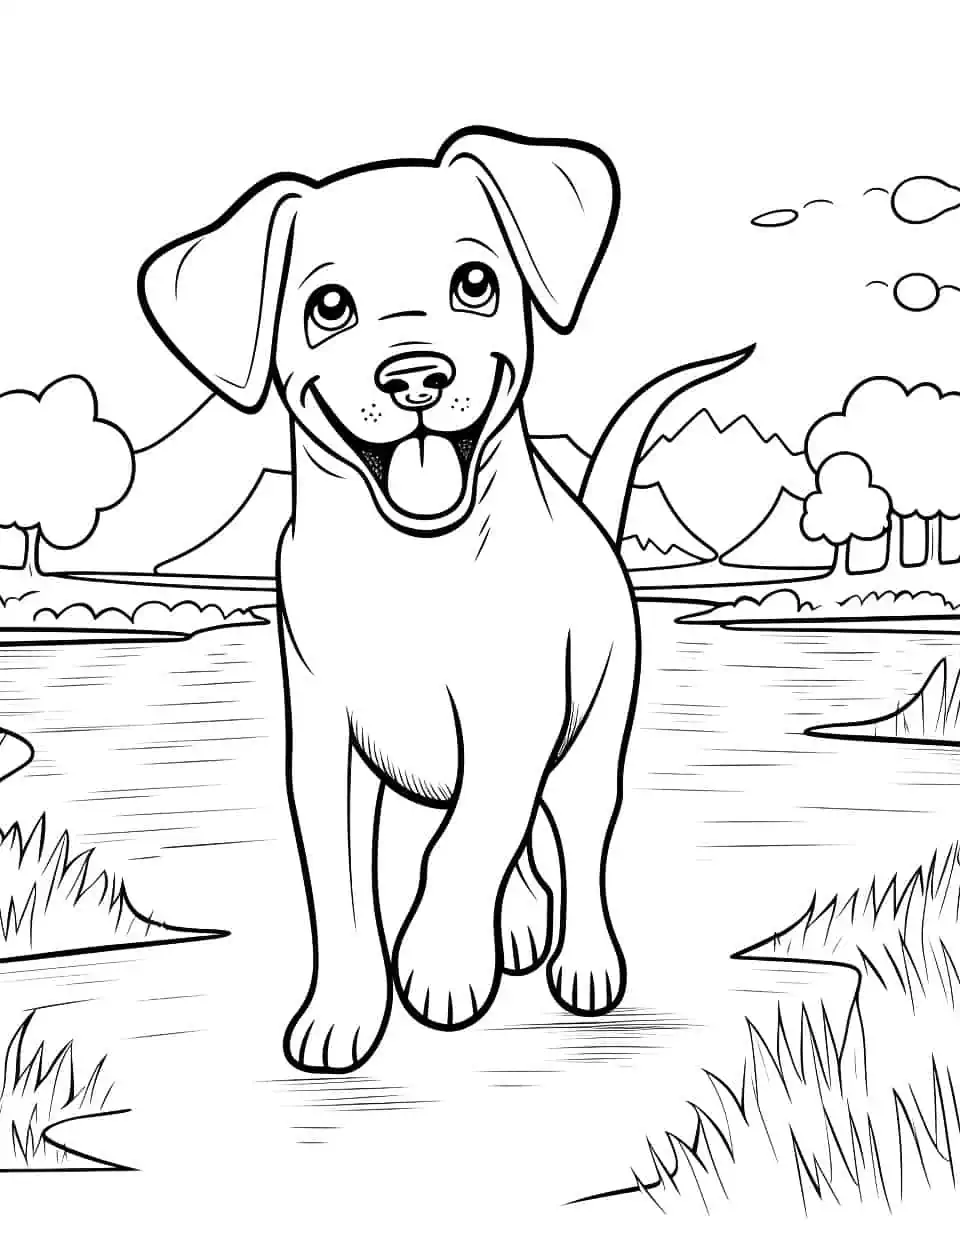 Labrador at the Park Coloring Page - A happy Labrador running in a park with trees and a pond in the background.